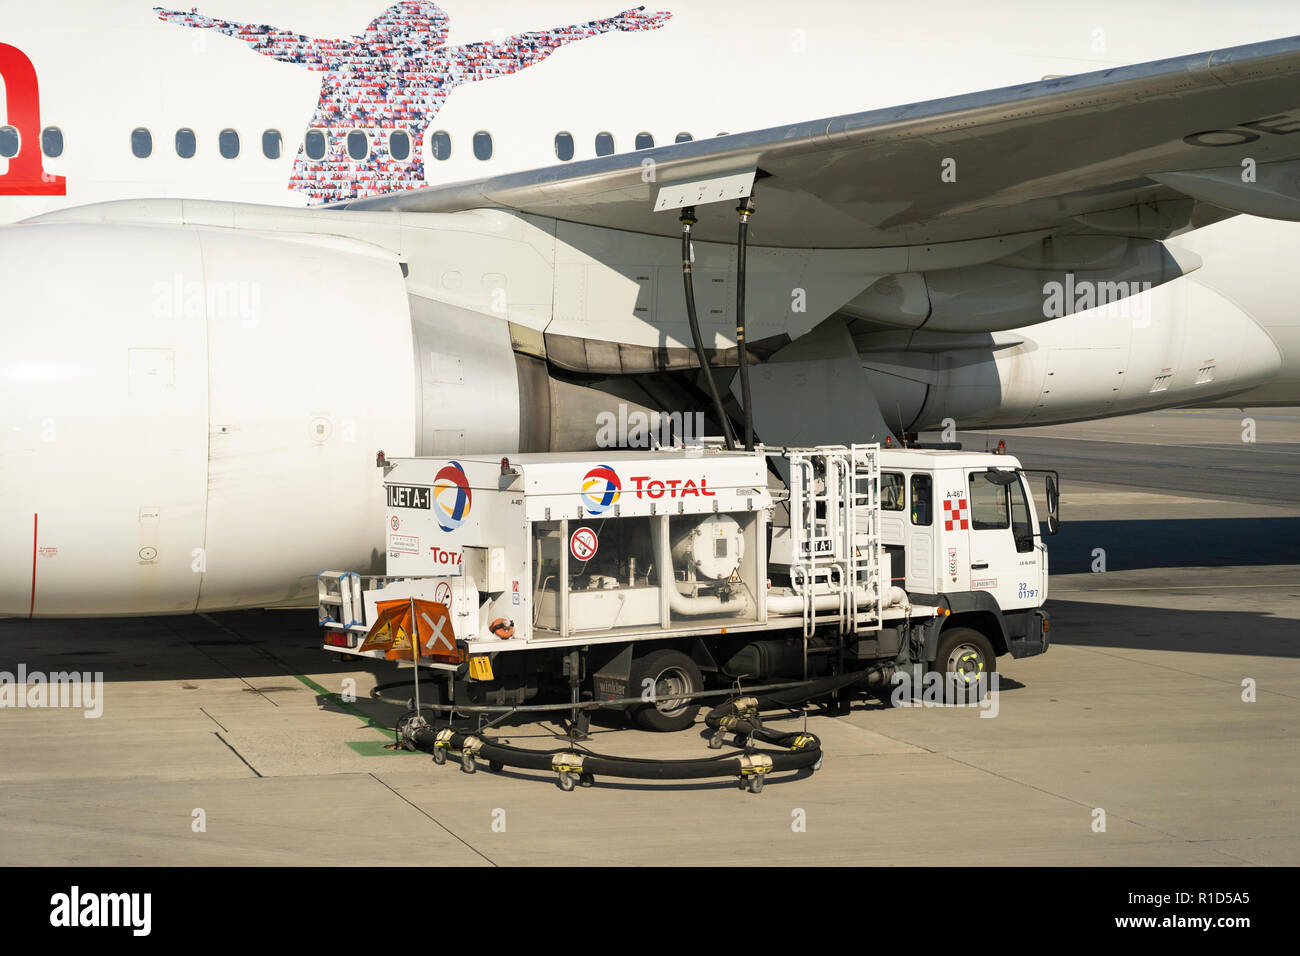 A Total aviation fuel truck refuelling an Austrian Airlines passenger airliner at Vienna Airport, Austria Stock Photo